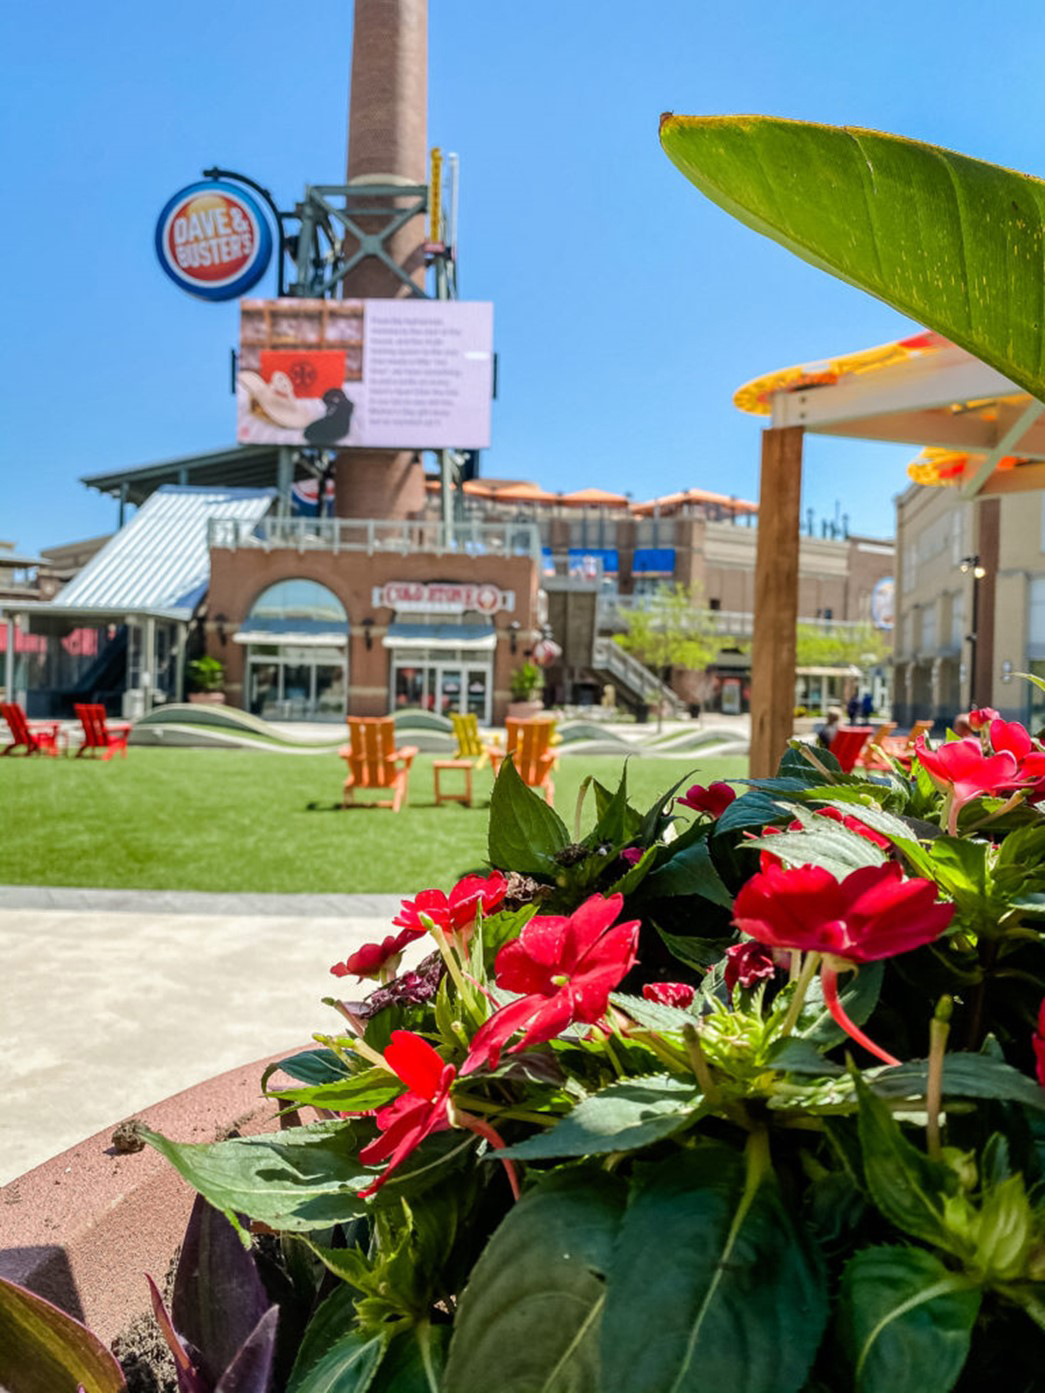 Six Things to Do at Legends Outlets This Summer - IN Kansas City Magazine